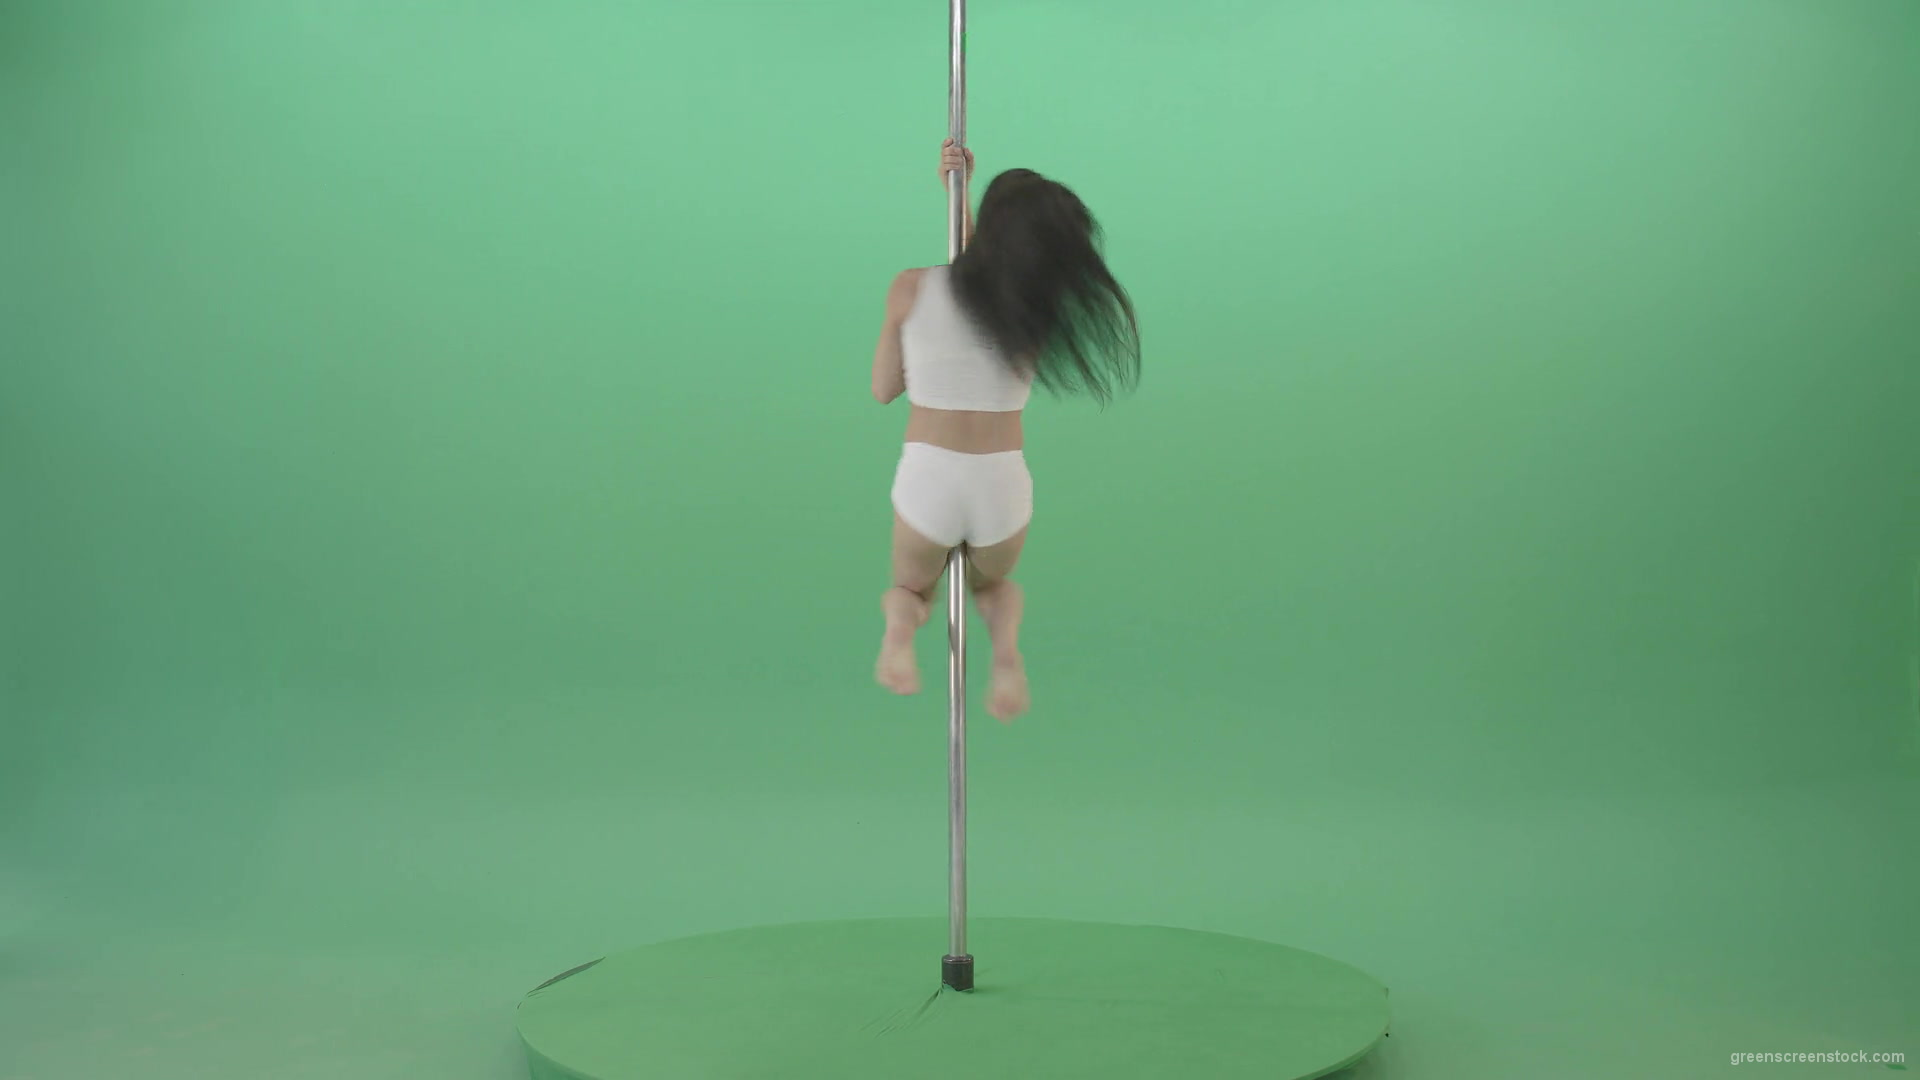 Dark-Hair-Girl-in-White-body-dress-underwear-spinning-on-the-pilon-showing-exotic-dance-over-green-screen-4K-Video-Footage-1920_008 Green Screen Stock